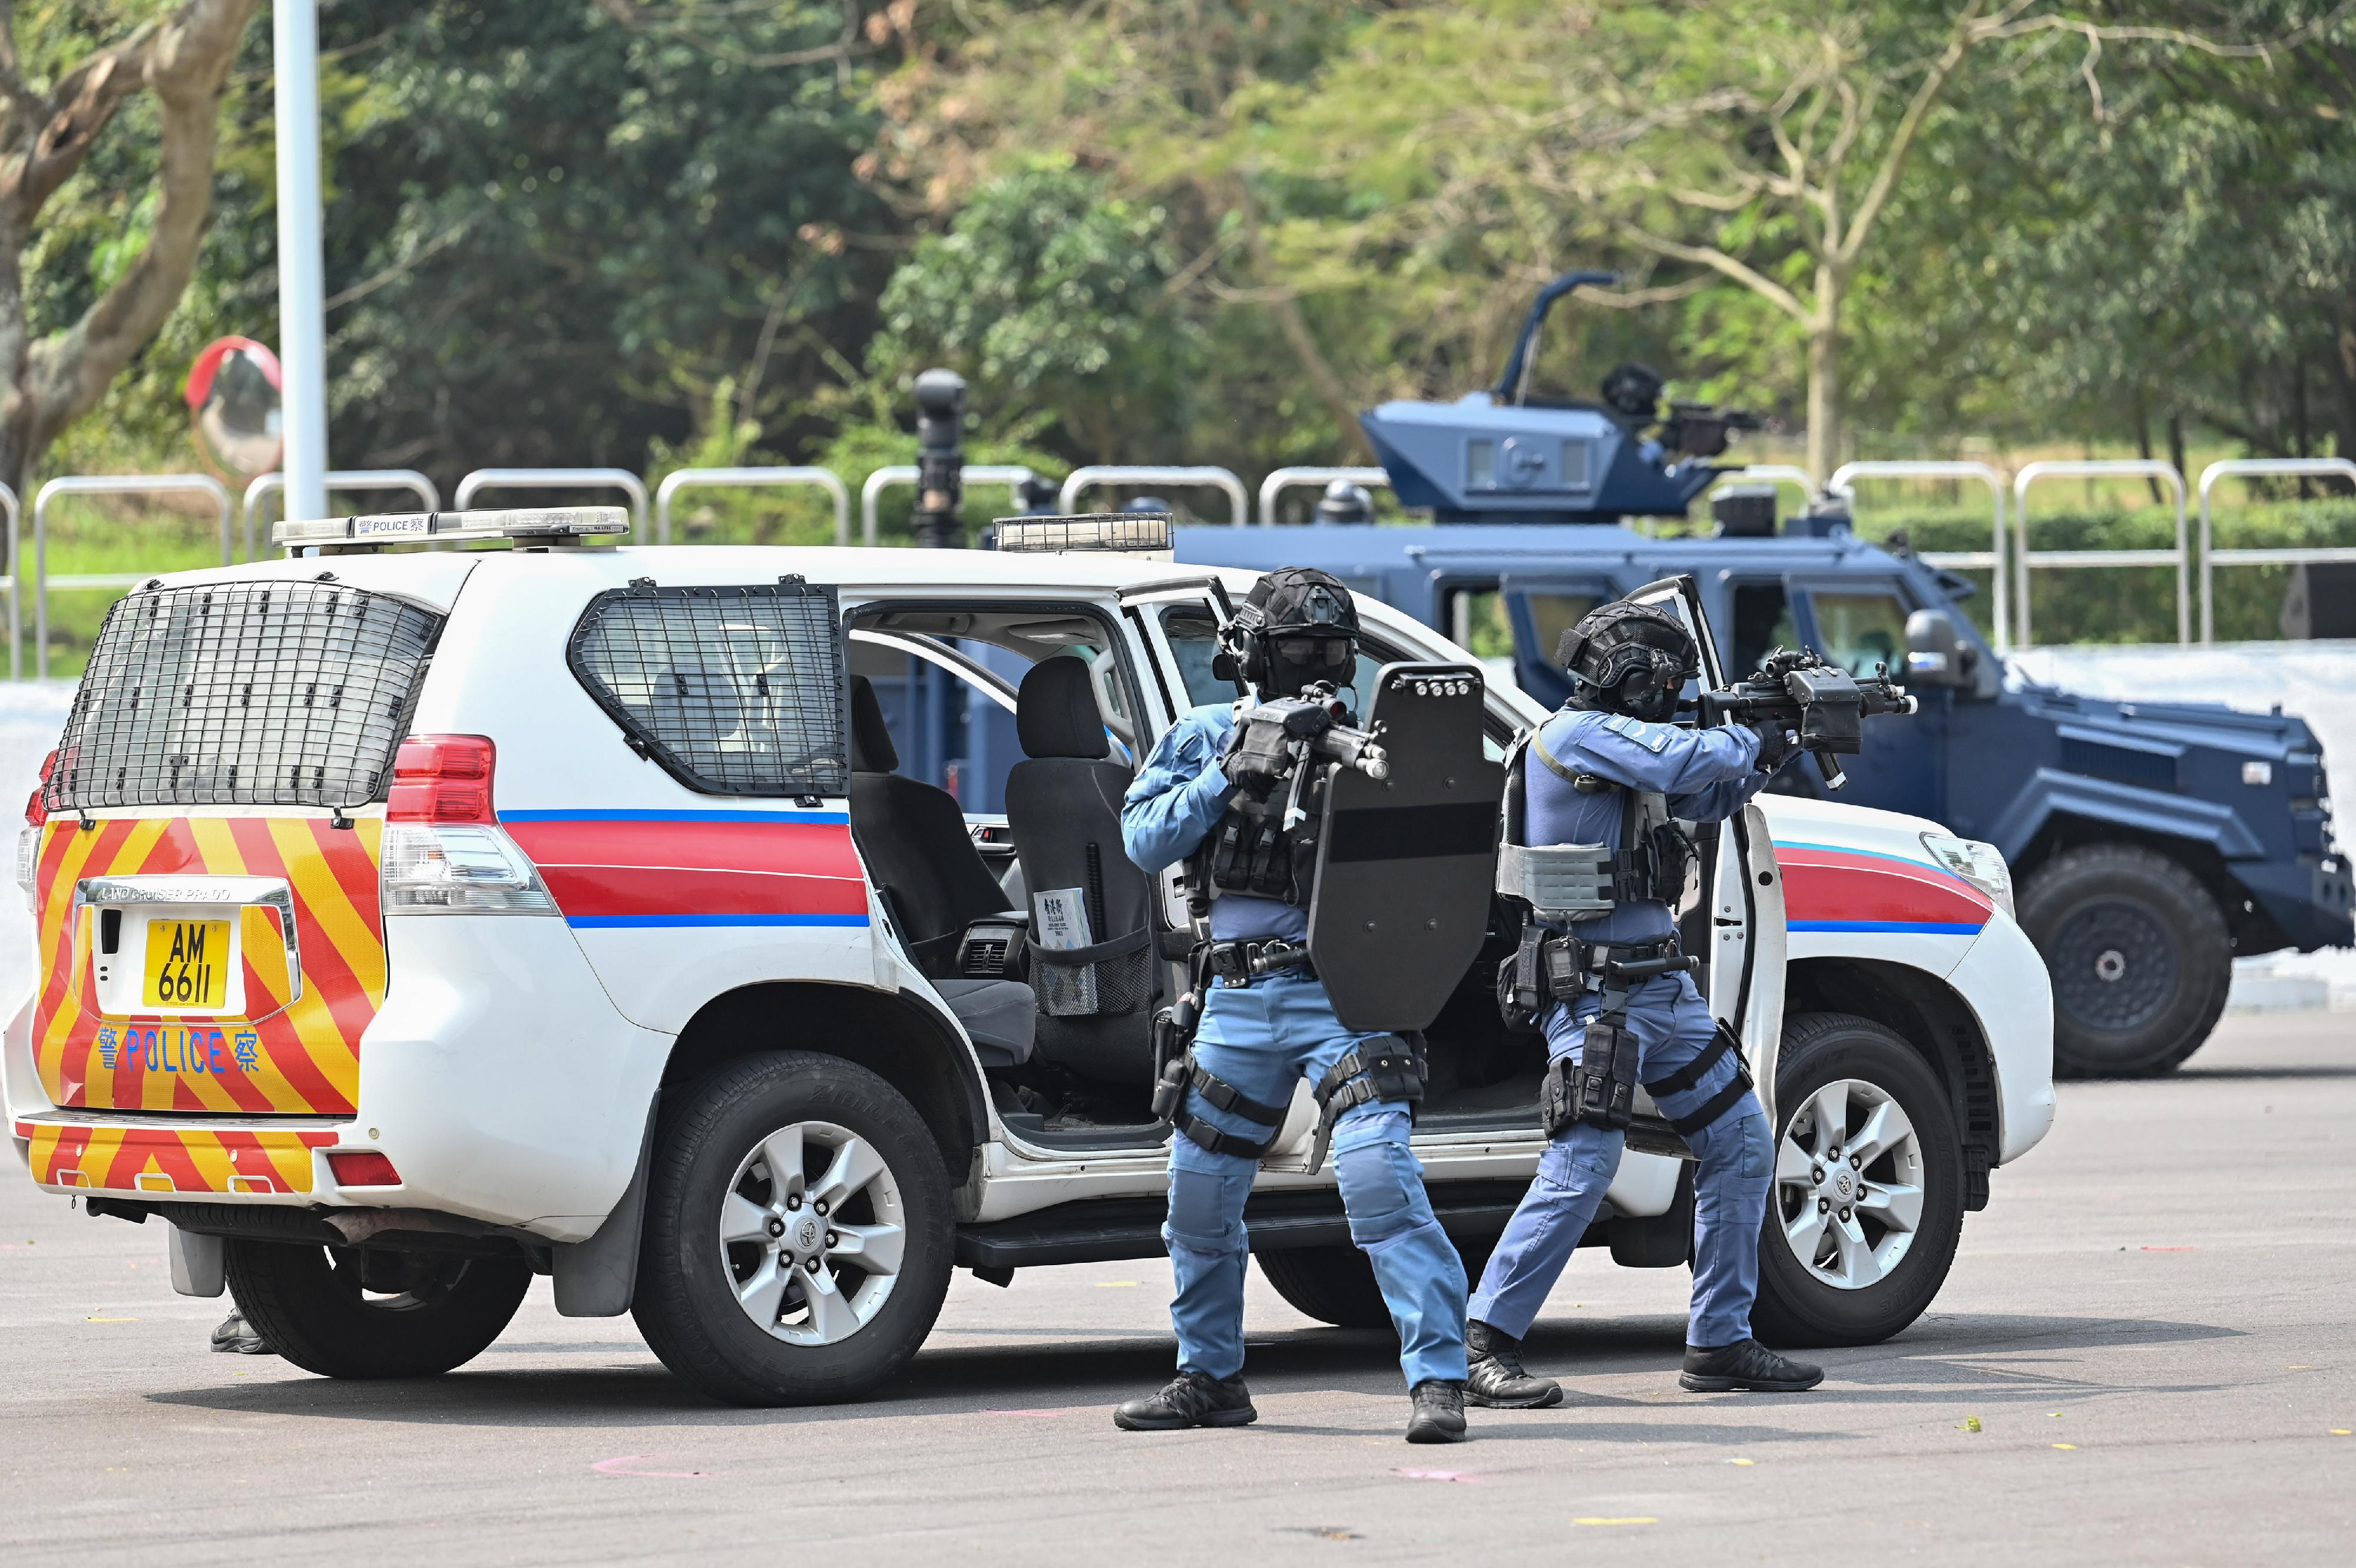 The Police Force held an open day in support of the National Security Education Day at Hong Kong Police College today (April 15). Photo shows a demonstration of anti-terrorism exercise by the Counter Terrorism Response Unit.